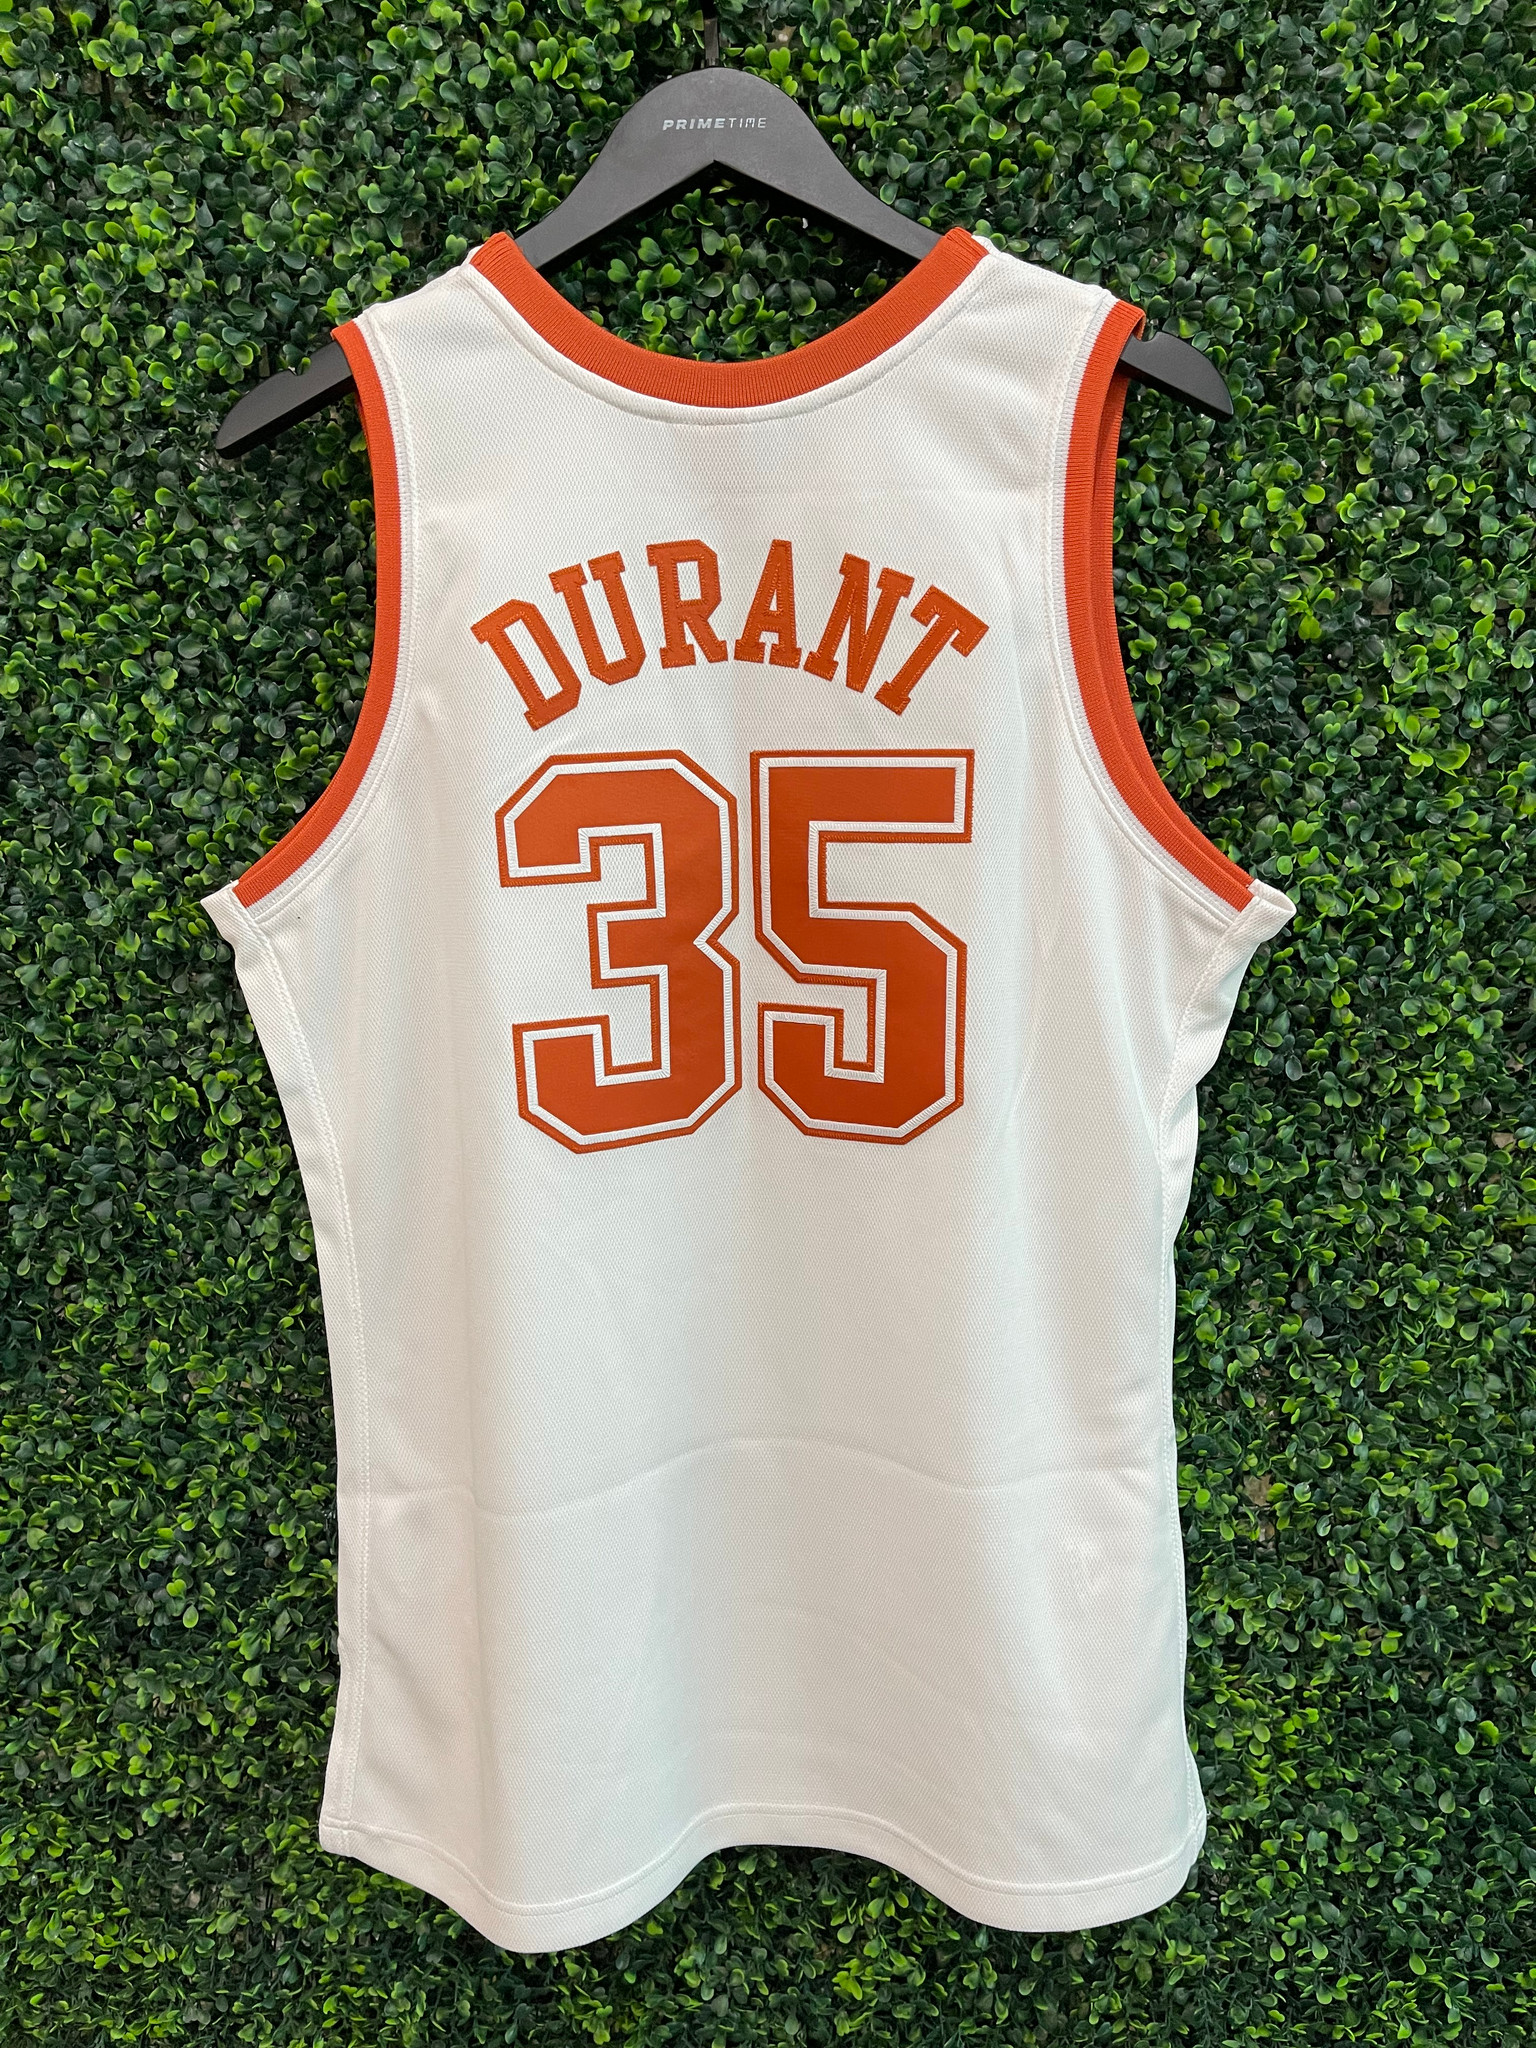 KEVIN DURANT TEXAS MITCHELL AND NESS JERSEY - Primetime